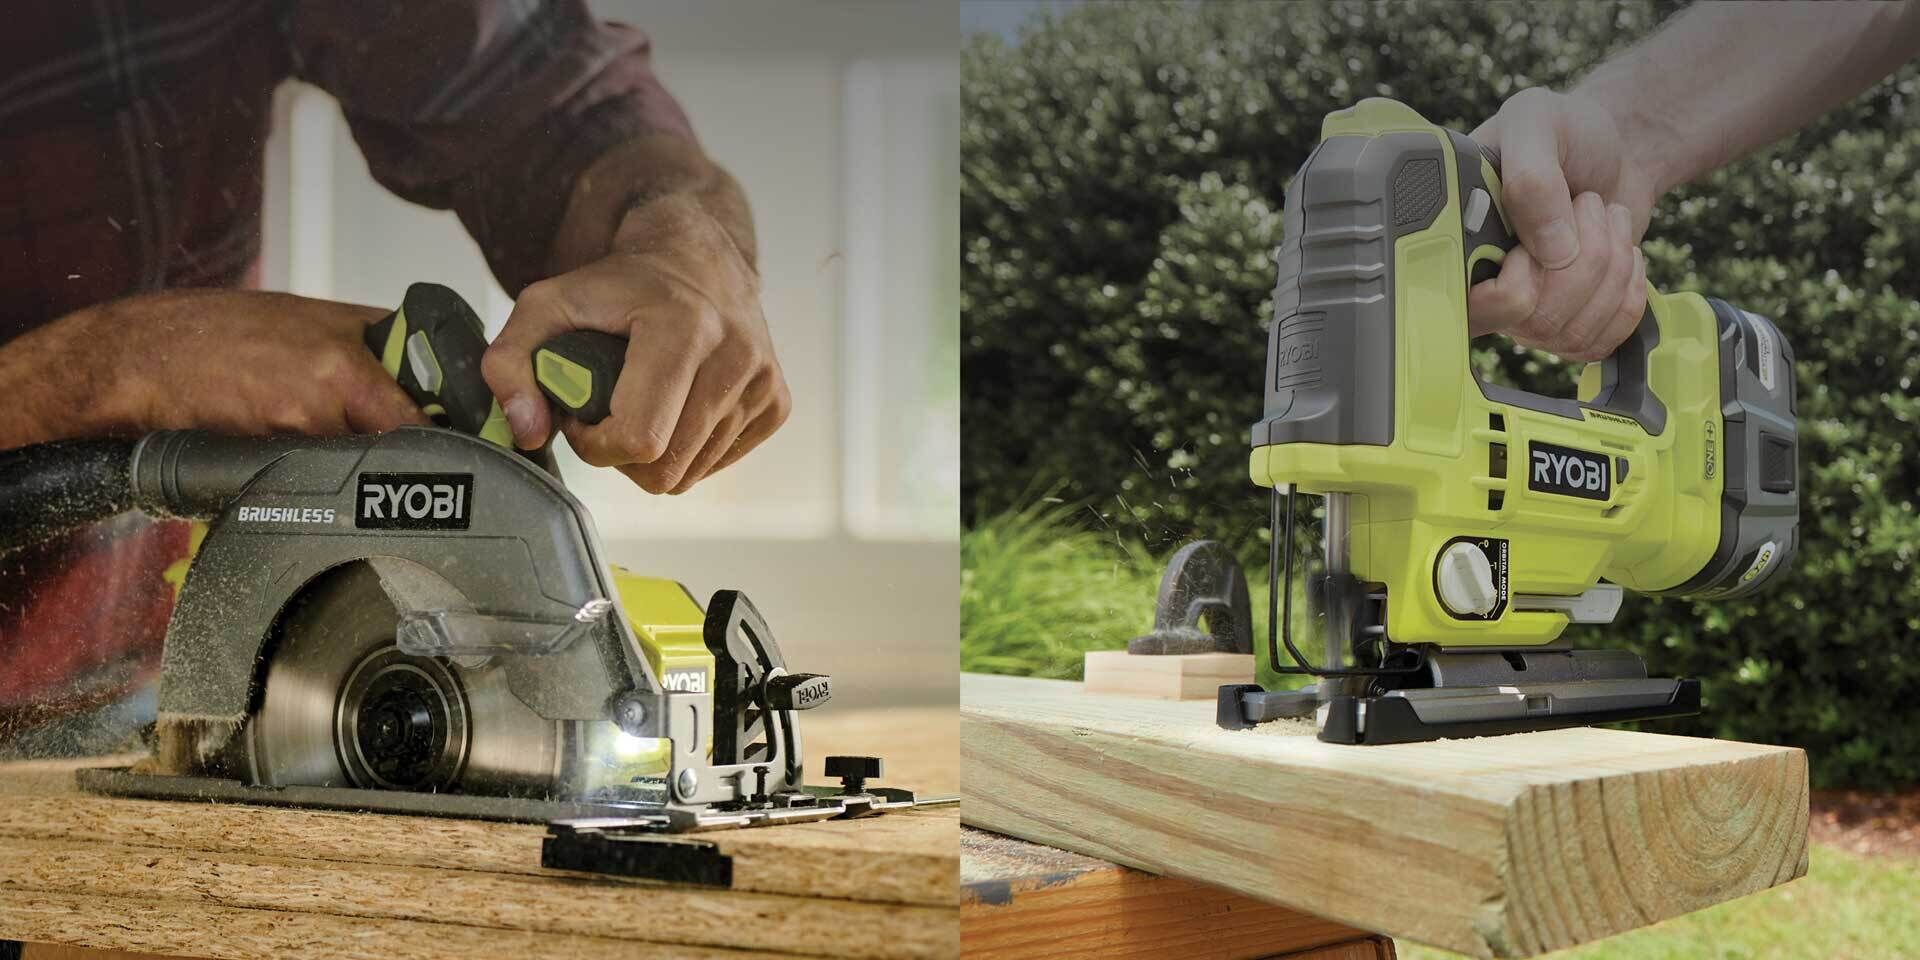 A Ryobi circular saw and a Ryobi jigsaw being used to demonstrate different types of cuts